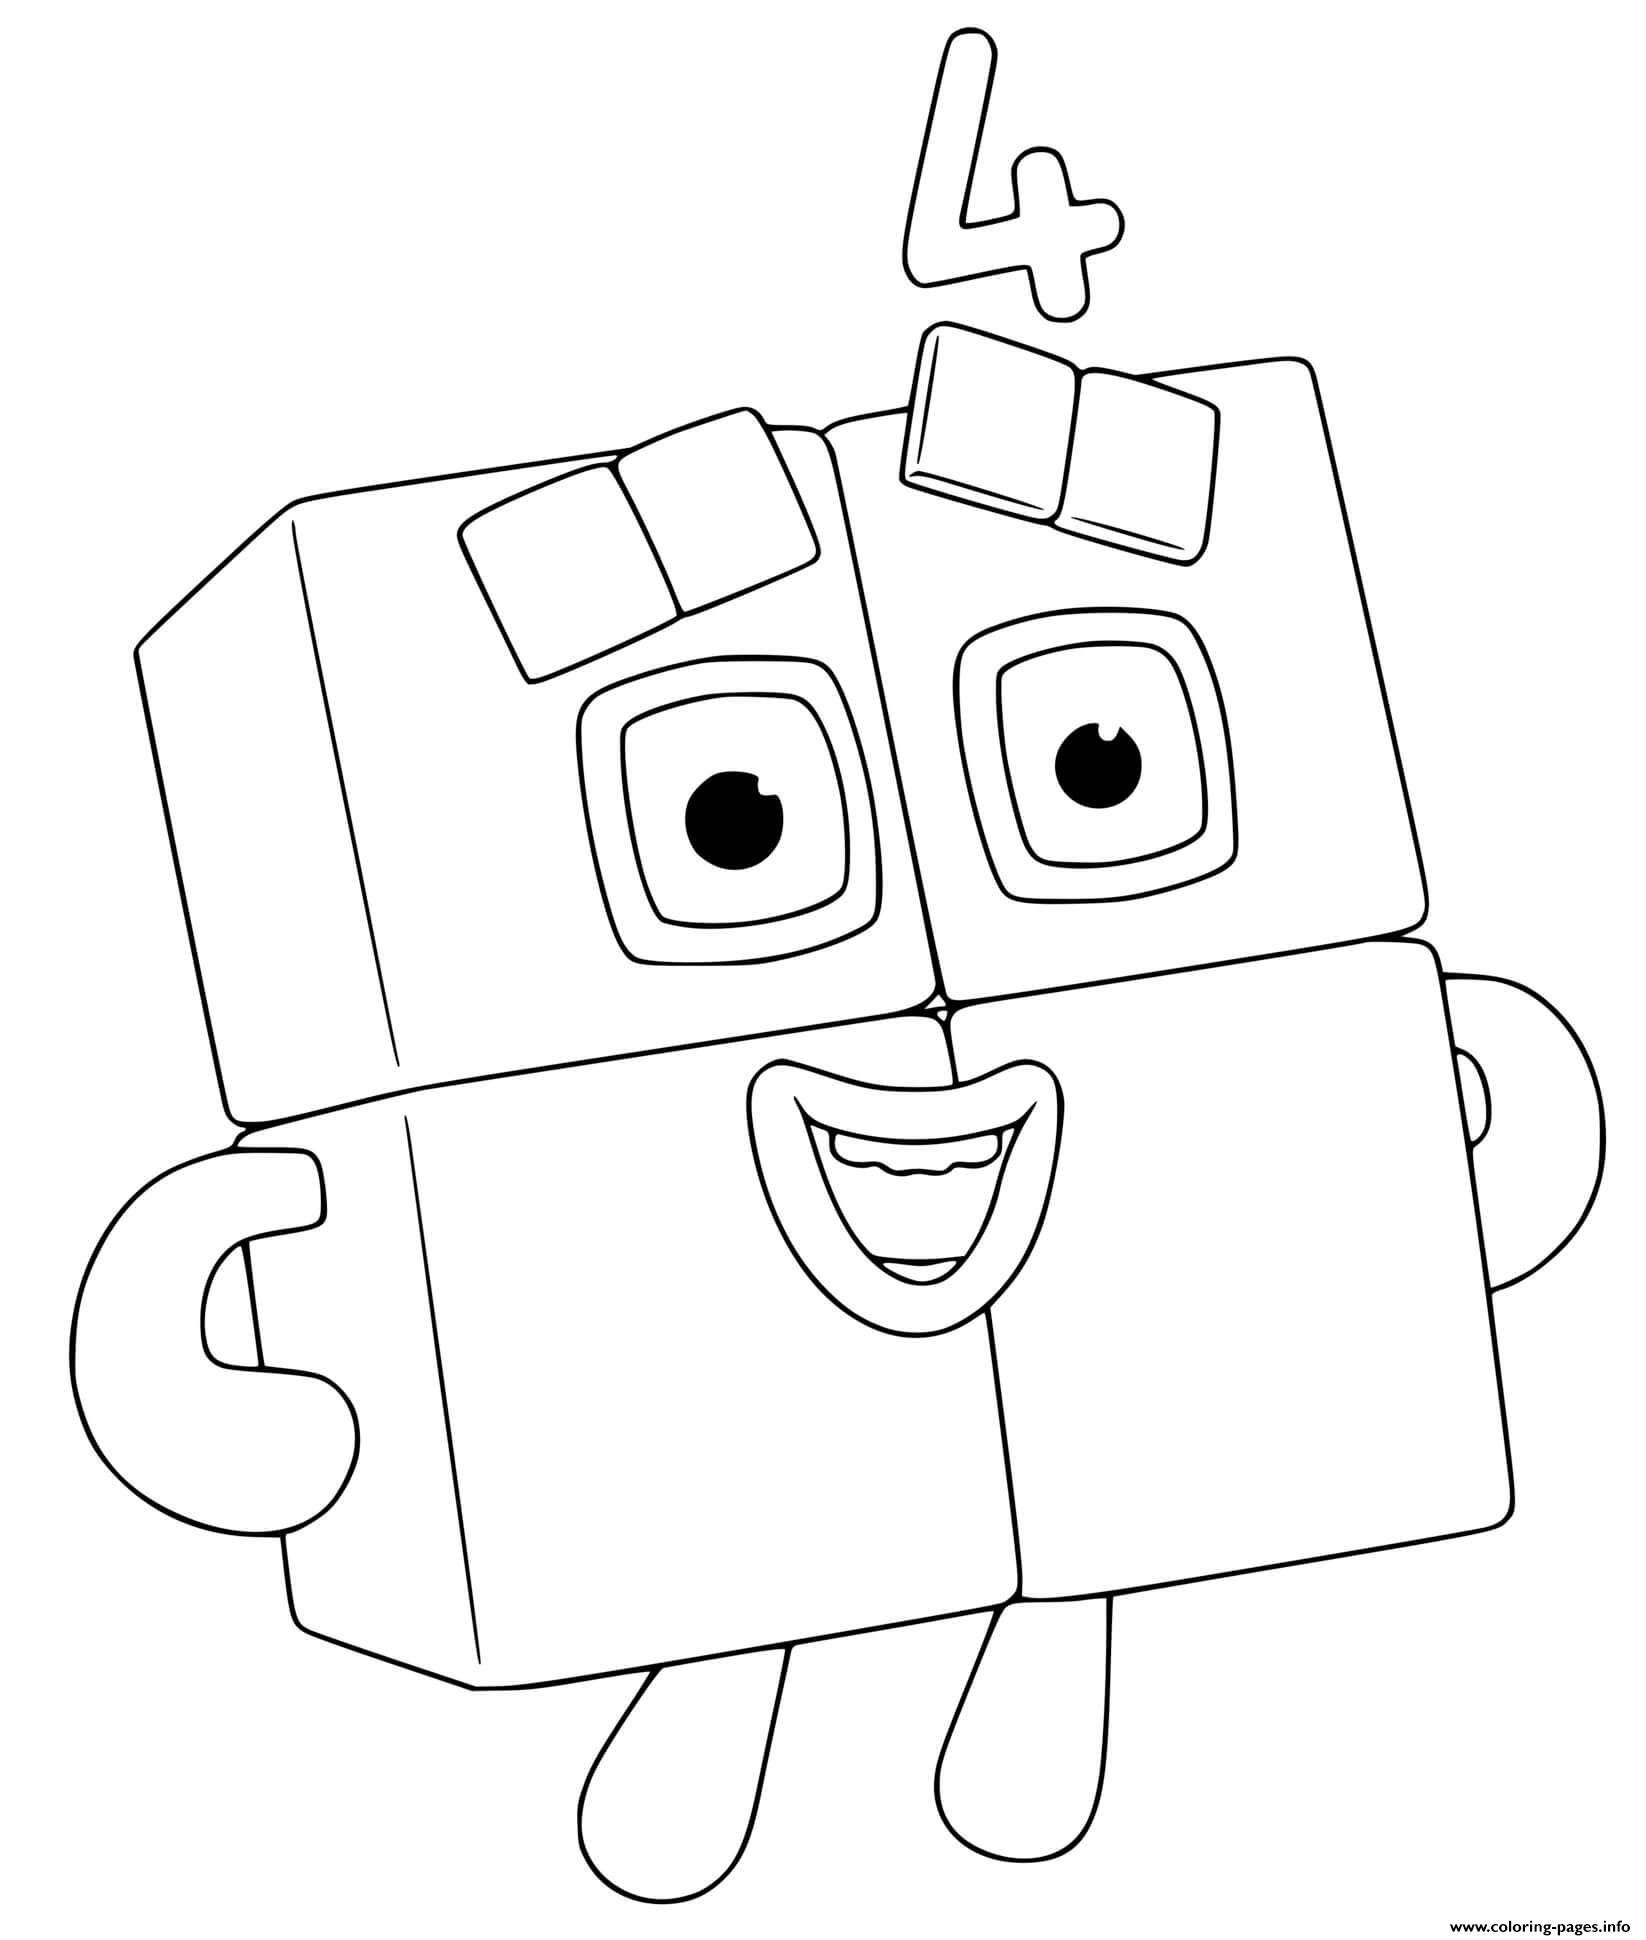 28-clever-photos-11-numberblocks-printable-coloring-pages-all-new